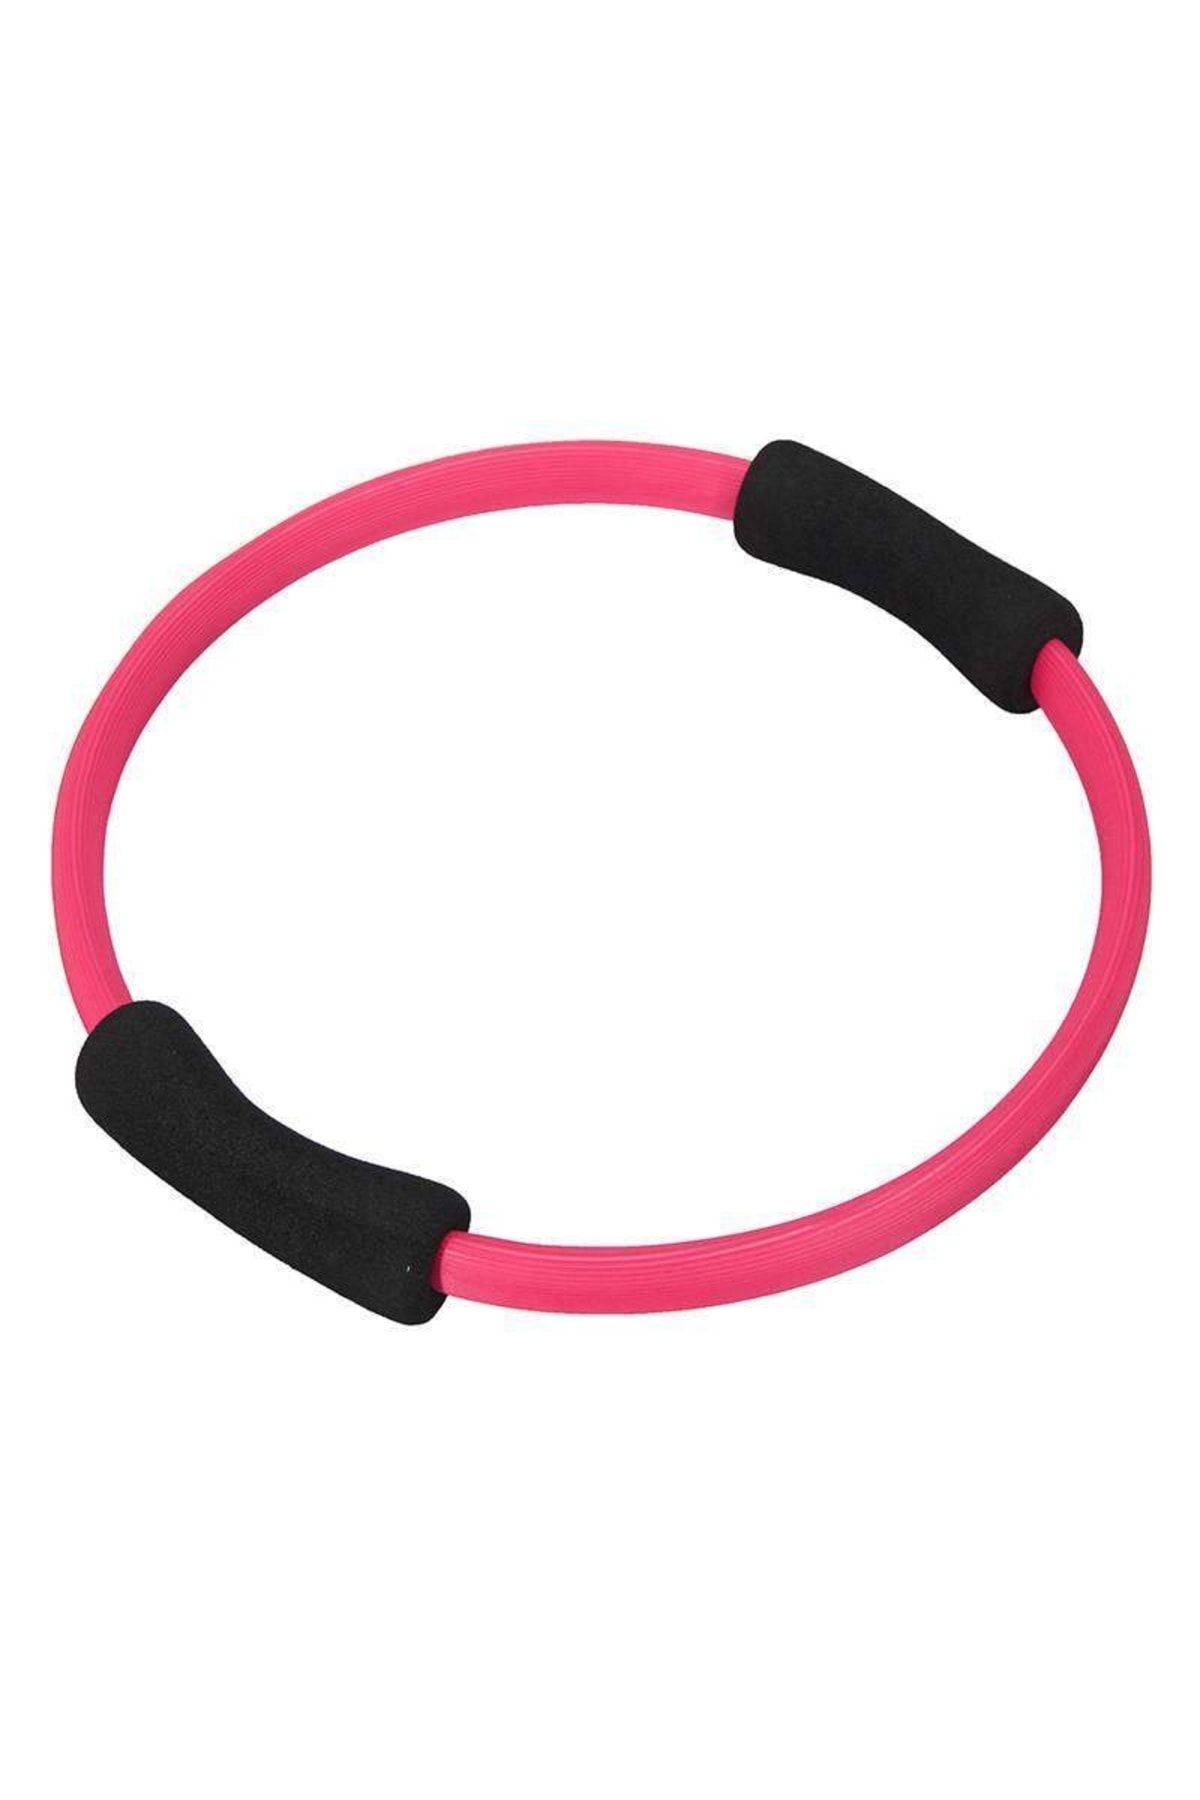 Buy The ProsourceFit Resistance Ring enhances Pilates Workouts with Light  Resistance to Help Tone and Strengthen Your Entire core and Body Online at  Lowest Price Ever in India | Check Reviews &